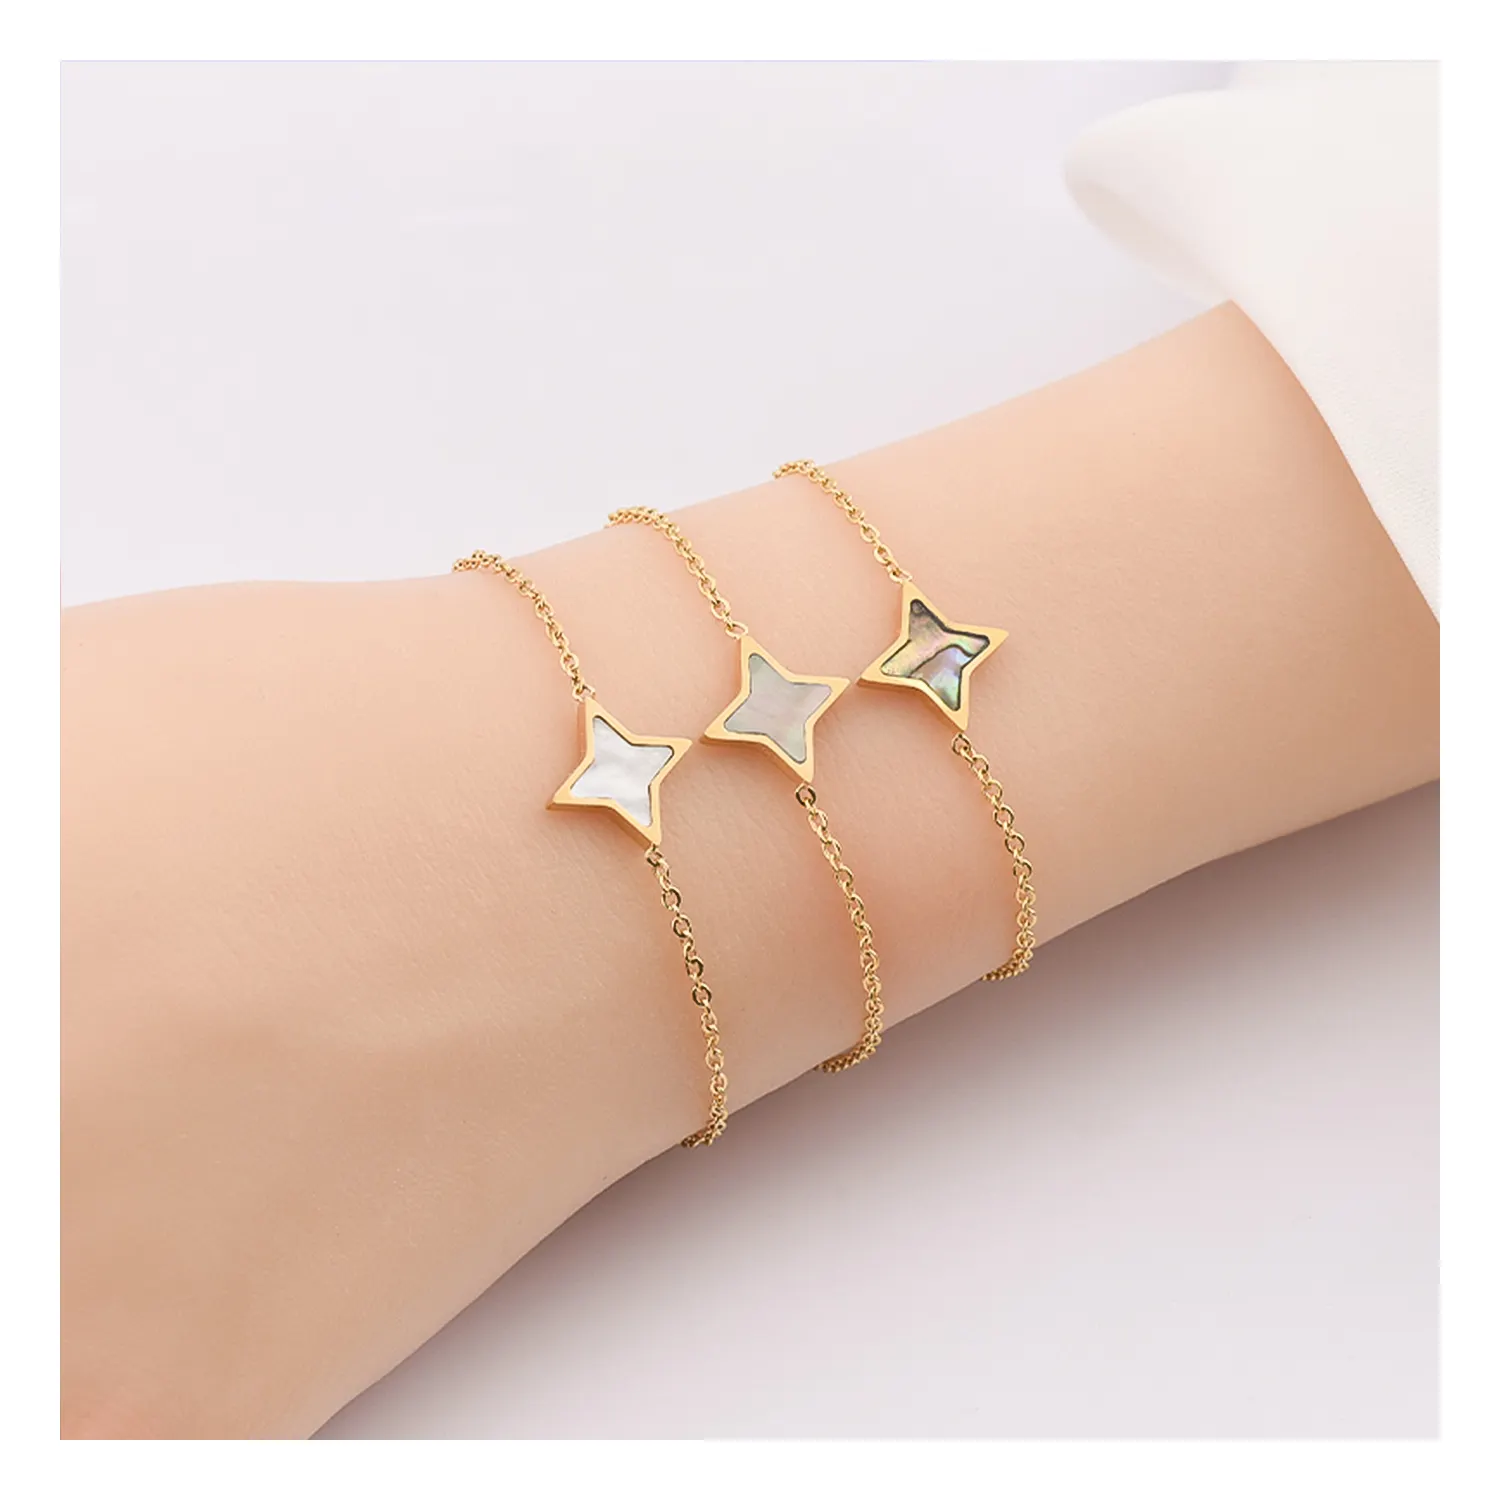 2020 hot sale stainless steel meaningful compass faith jewelry stone bracelet set natural gold color for women for girls